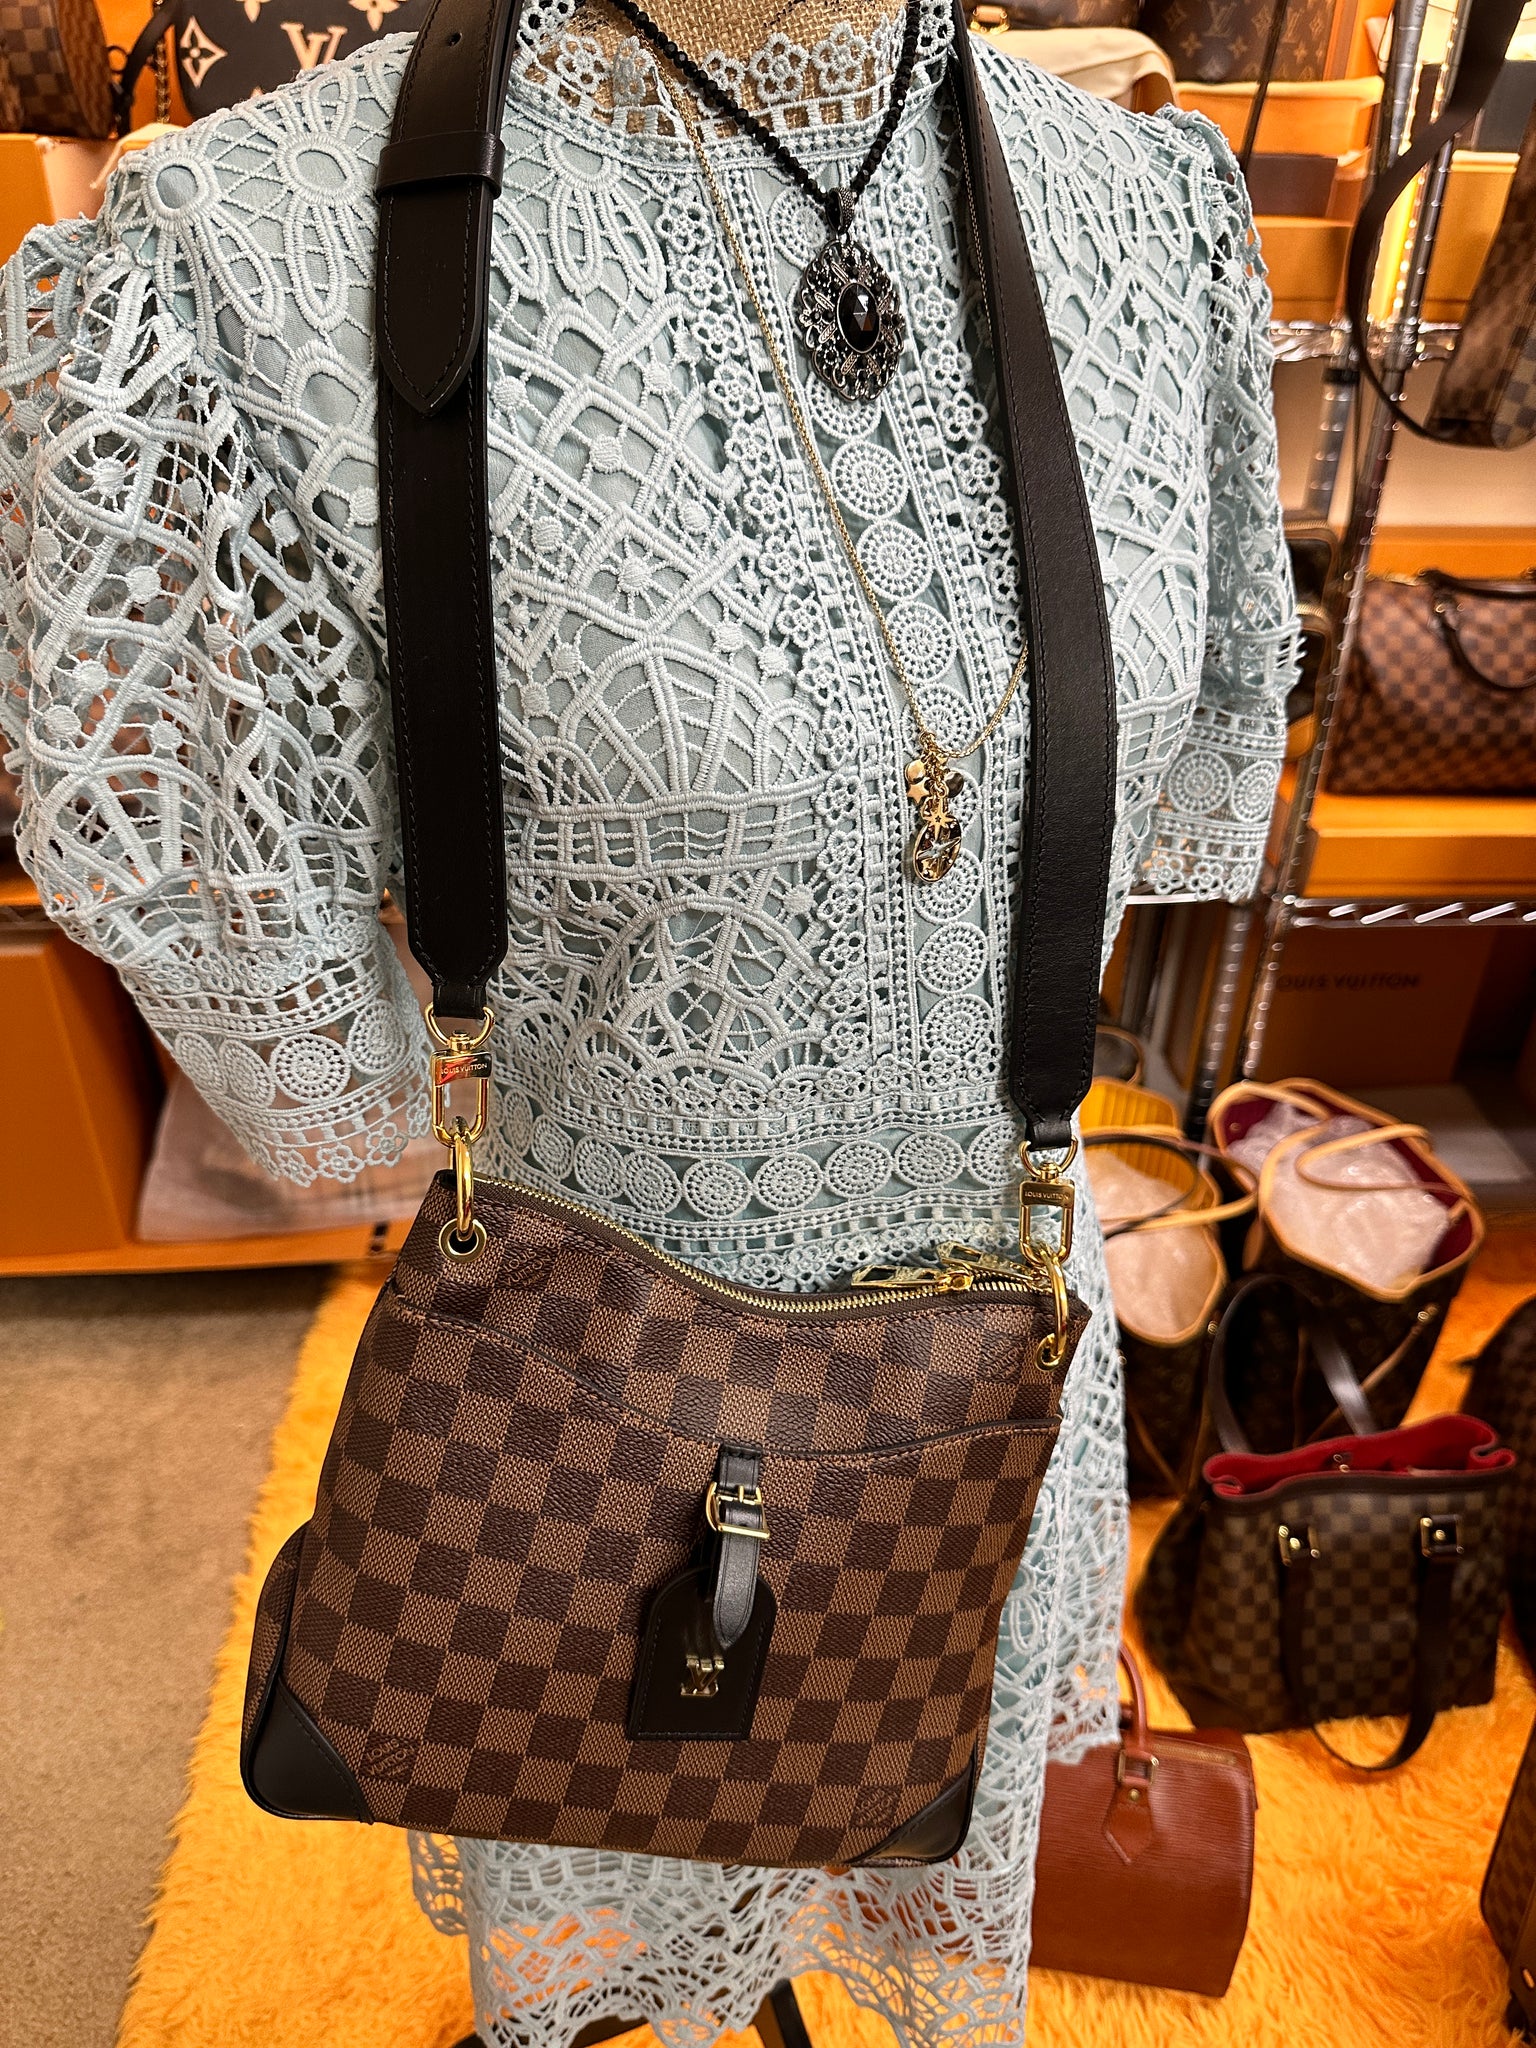 What FITS, Louis Vuitton New Odeon PM, Styling Options, New Release 2020